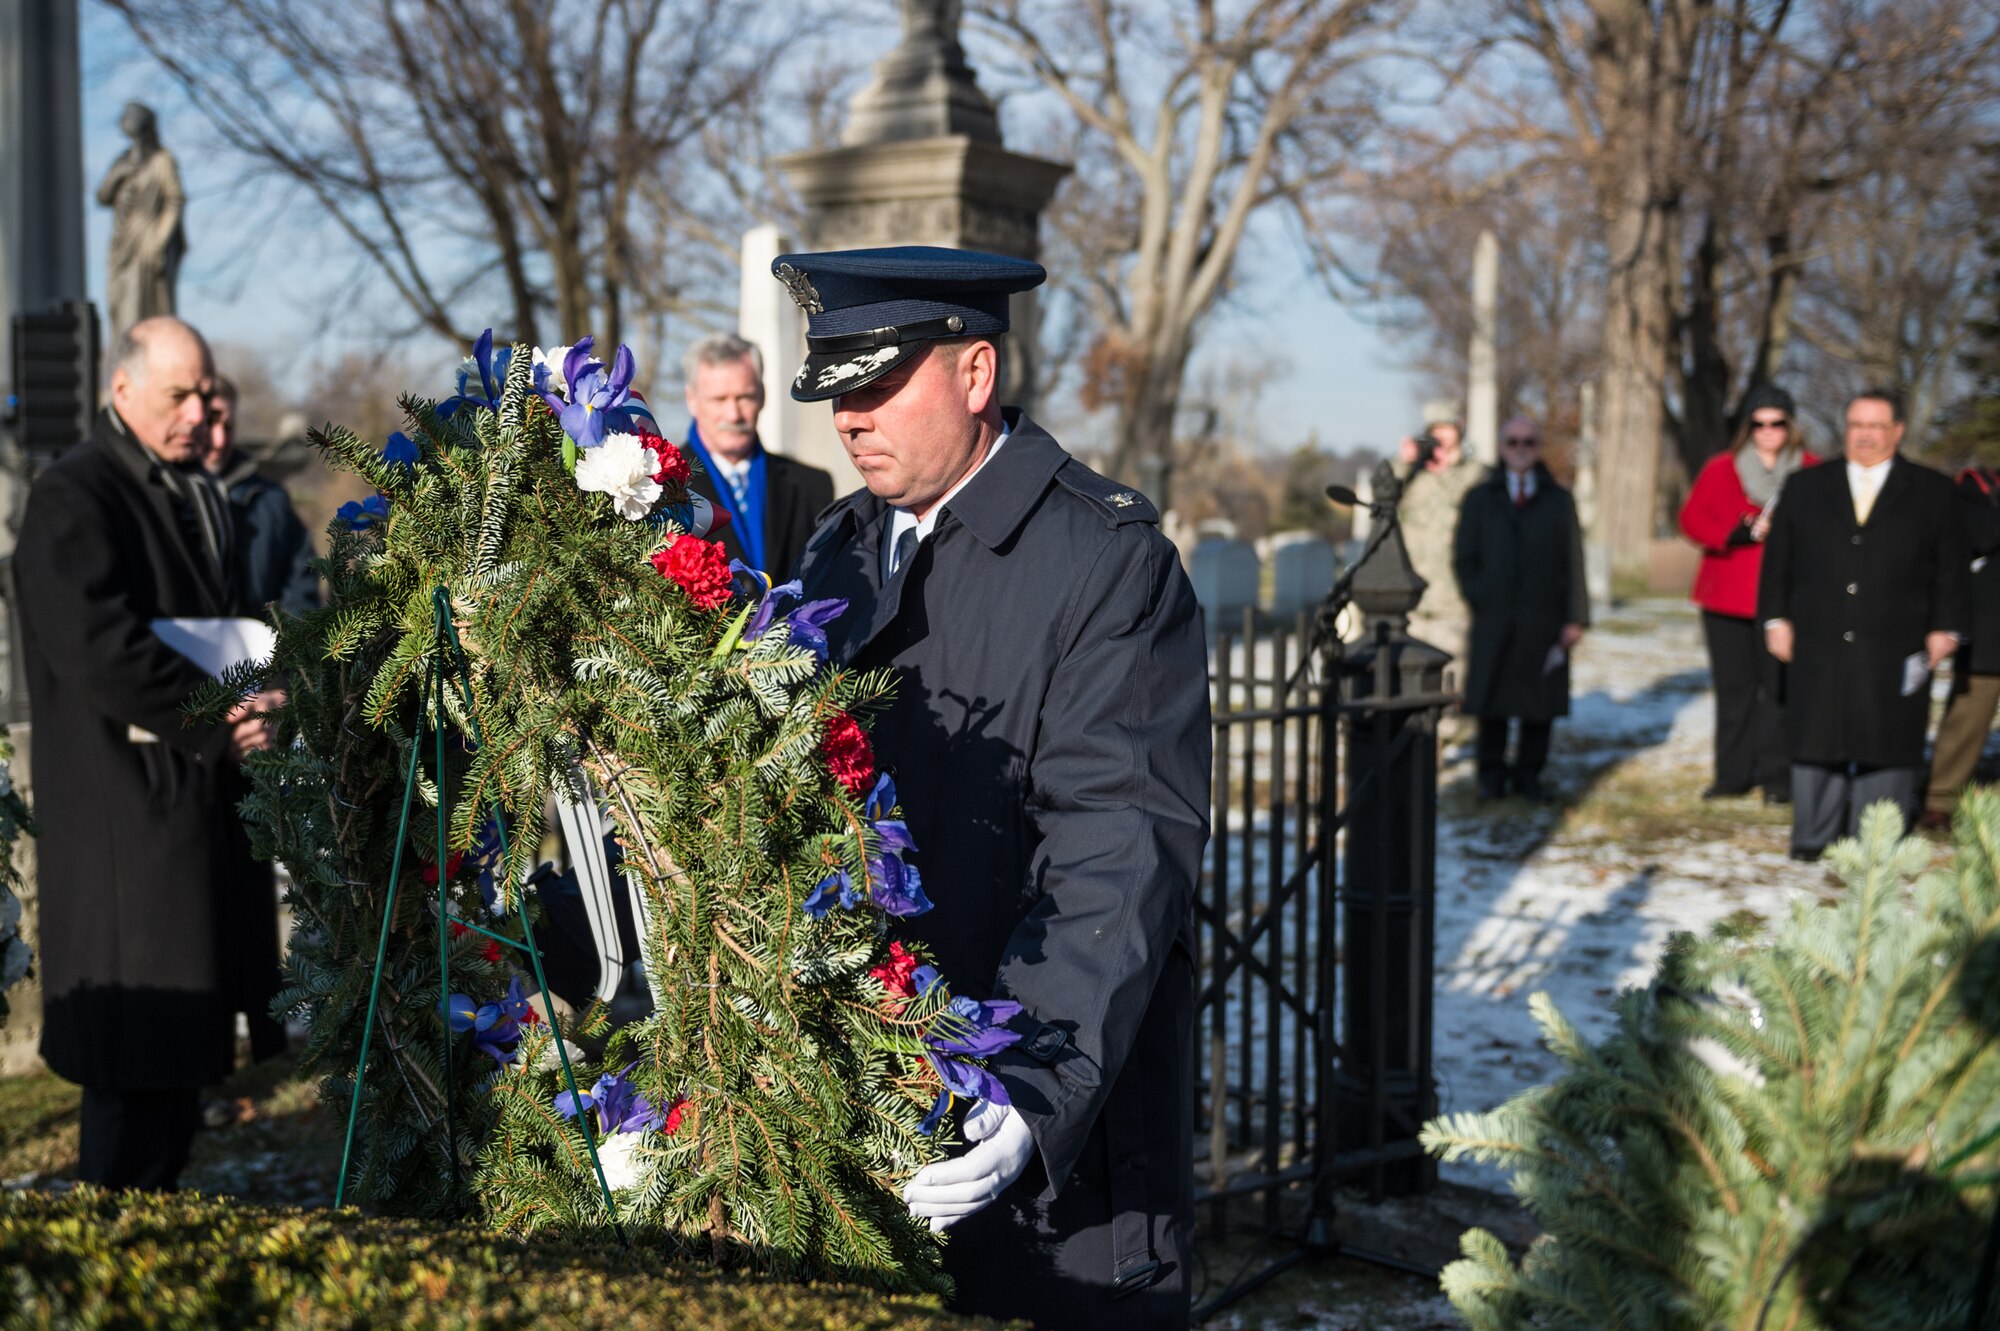 Col. Michael W. Bank Jr., vice commander of the 107th AW at Niagara Falls Air Reserve Station, Niagara Falls, N.Y., lays a wreath at the grave of President Millard Fillmore, Forest Lawn Cemetery, Buffalo, N.Y., Jan. 7, 2015. The ceremony, which is held by the University at Buffalo, commemorates Fillmore’s birthday.  (U.S. Air National Guard Photo/ Staff Sgt. Ryan Campbell)